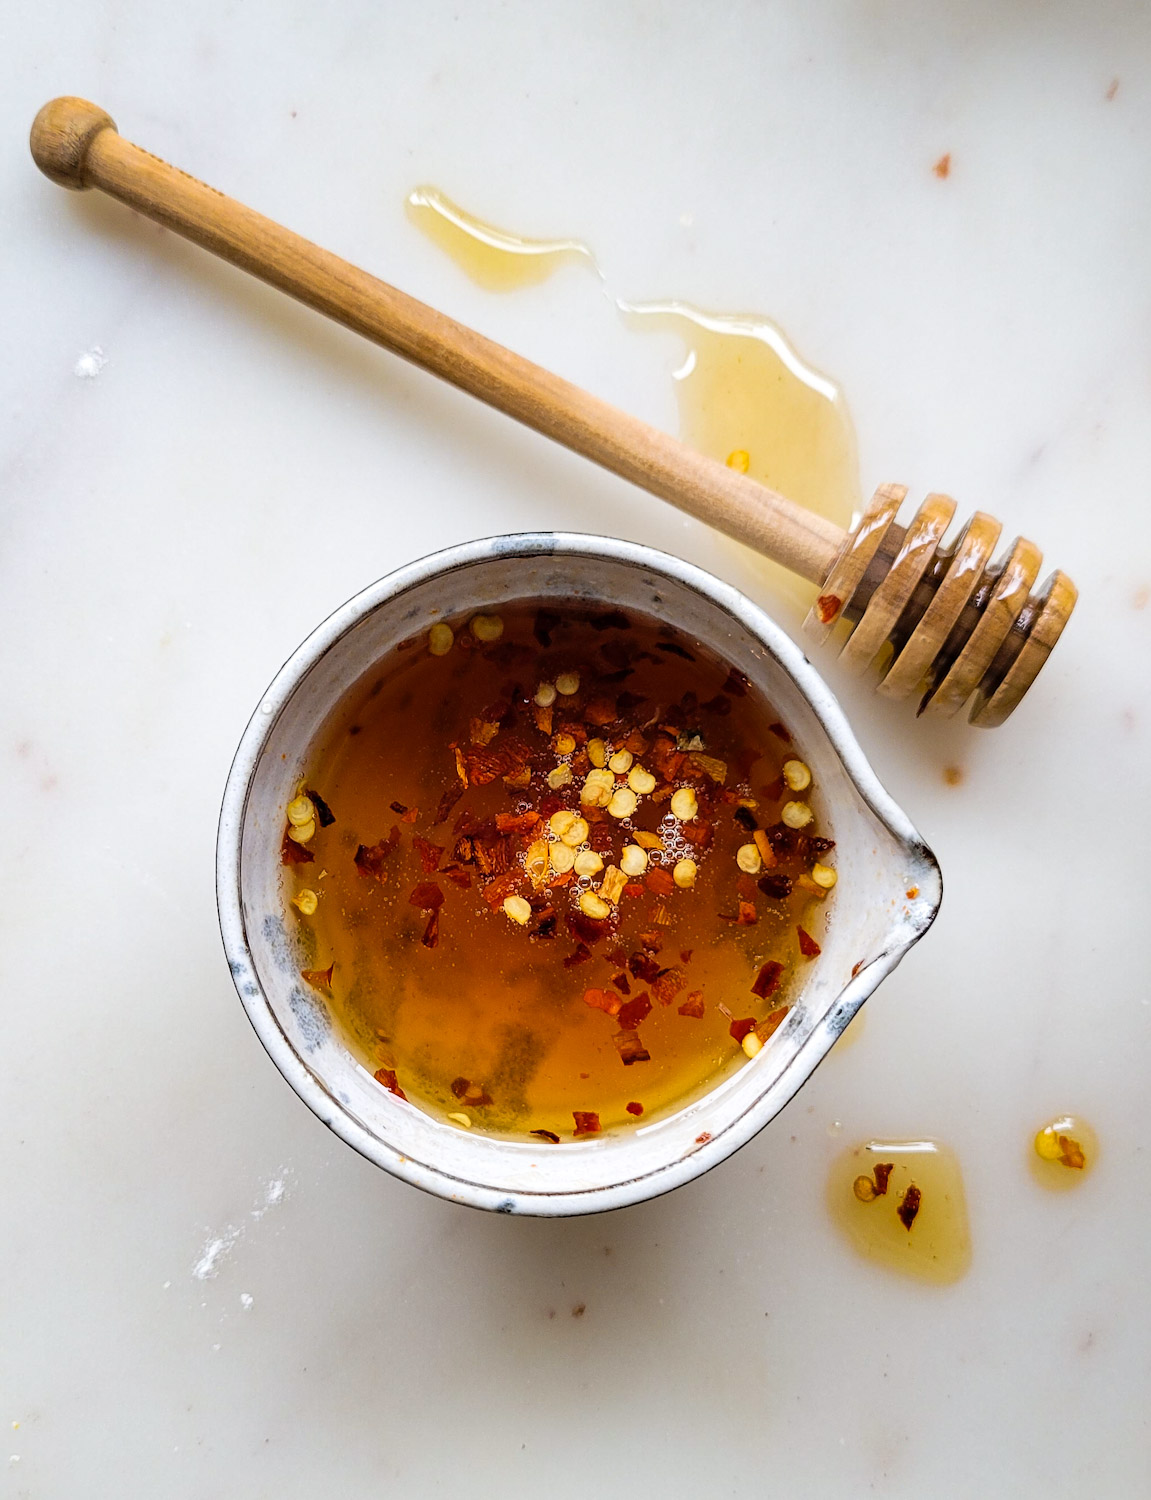 A bowl of Hot Honey and a wooden honey drizzle stick are sitting on the counter.